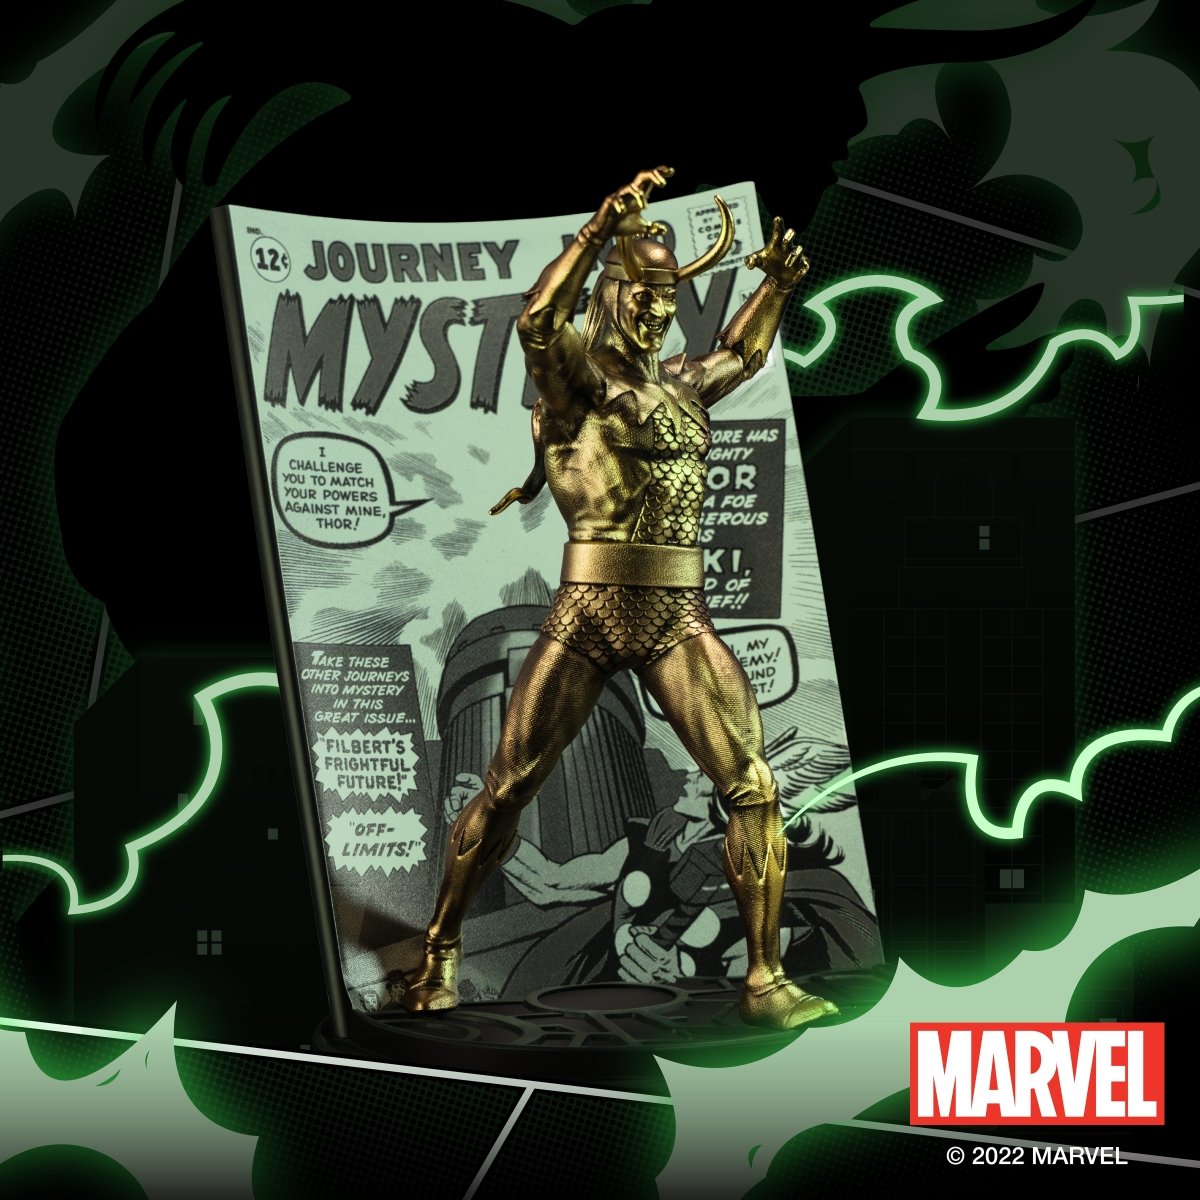 (Pre-Order) Loki Journey into Mystery Volume 1 #85 Limited Edition Figurine - Collectible Gift Statue - RS Figures